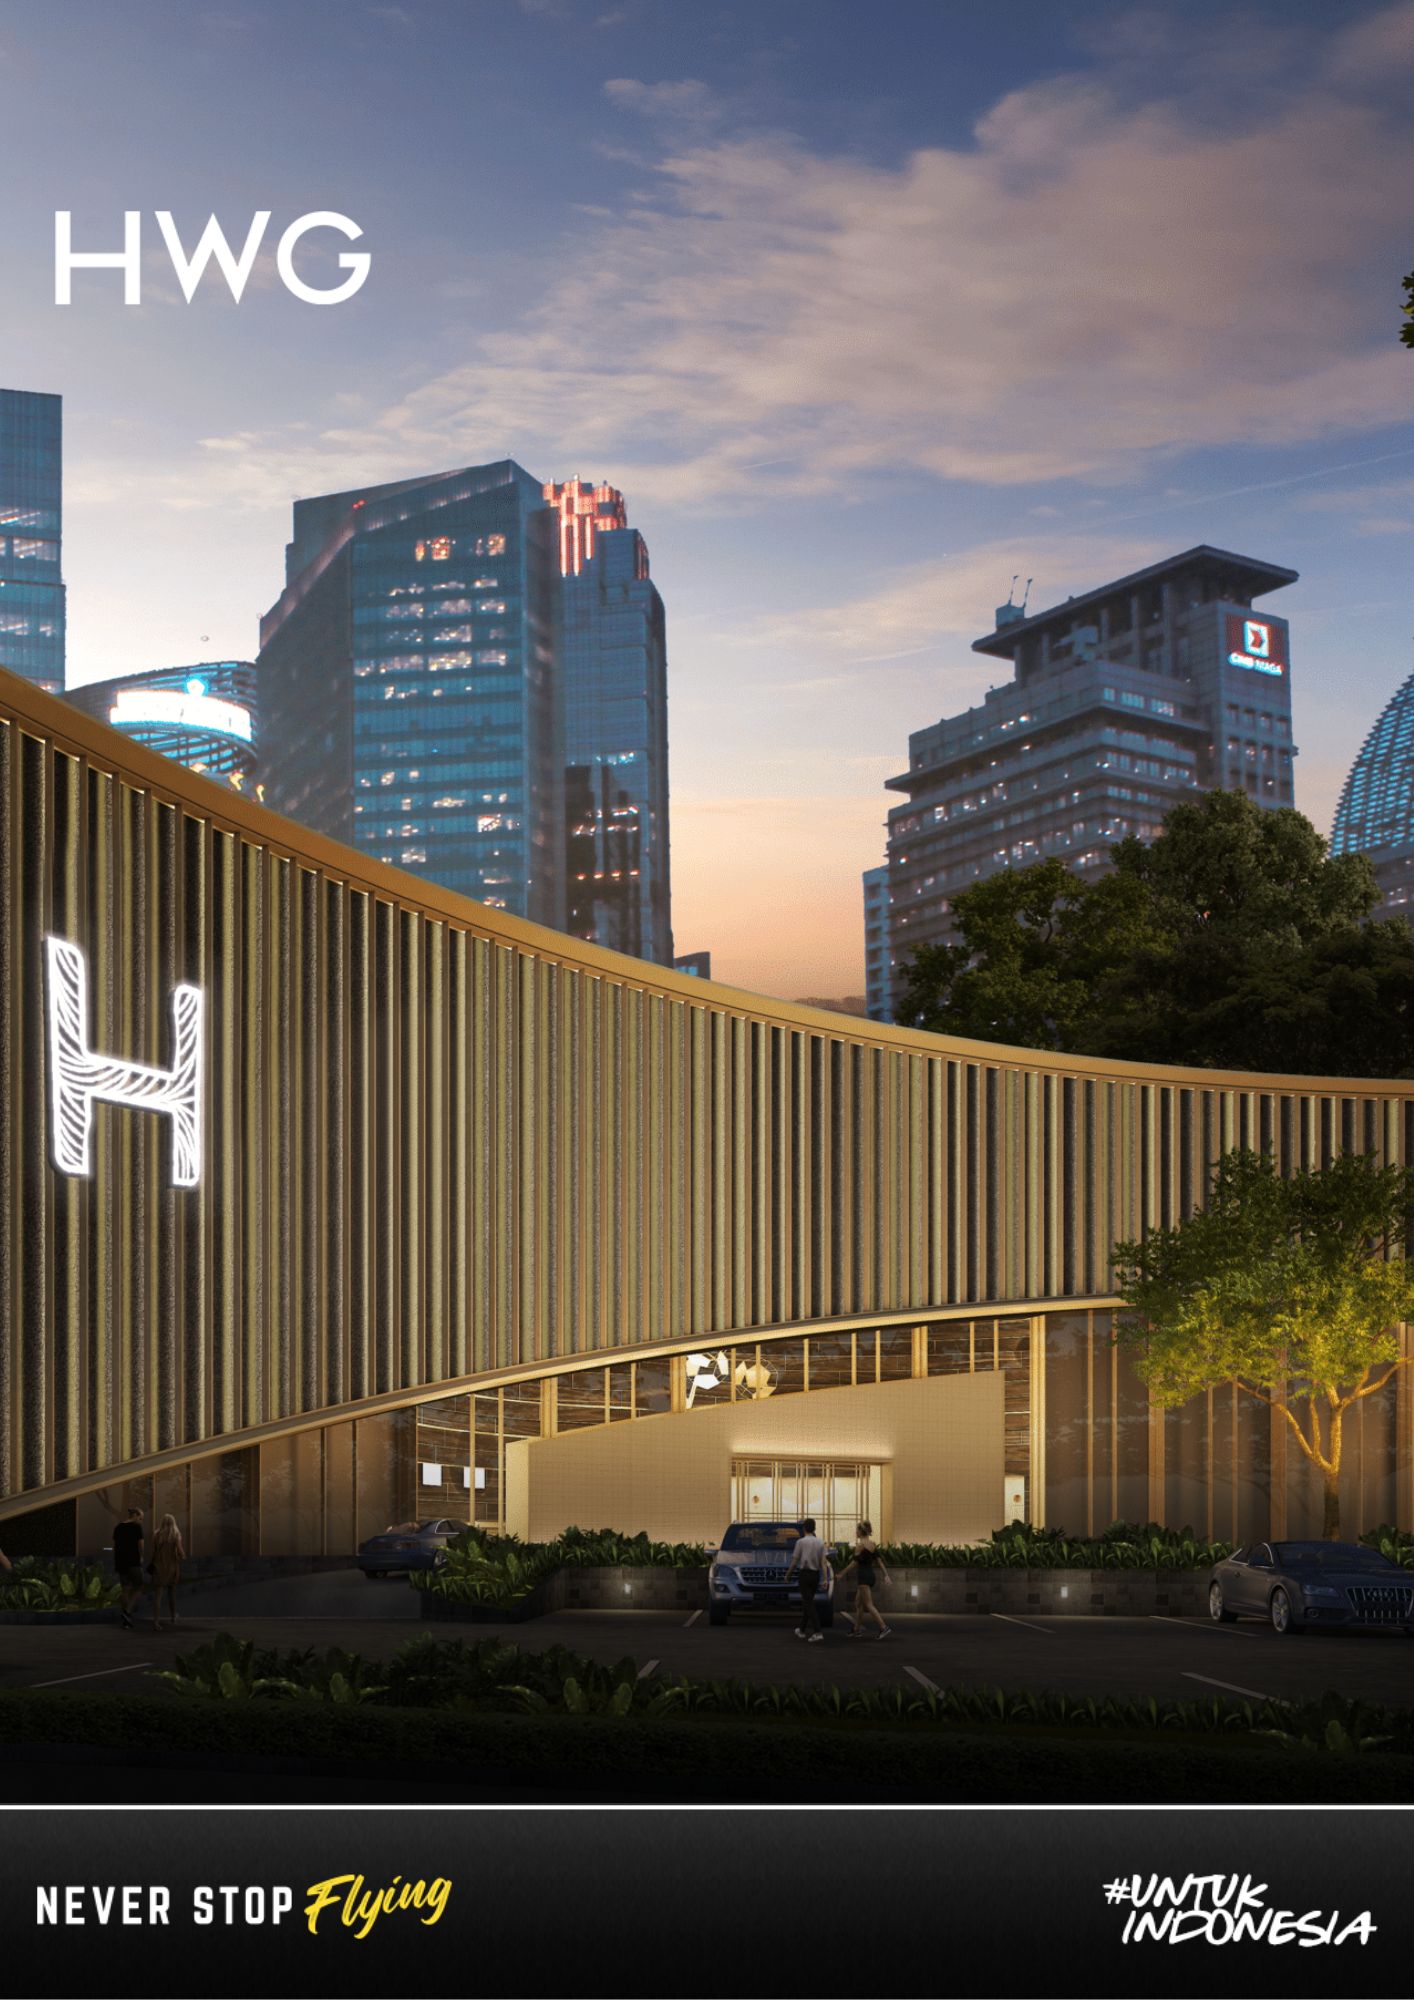 The best nightclub in Asia is now officially open in SCBD Jakarta, The H Club